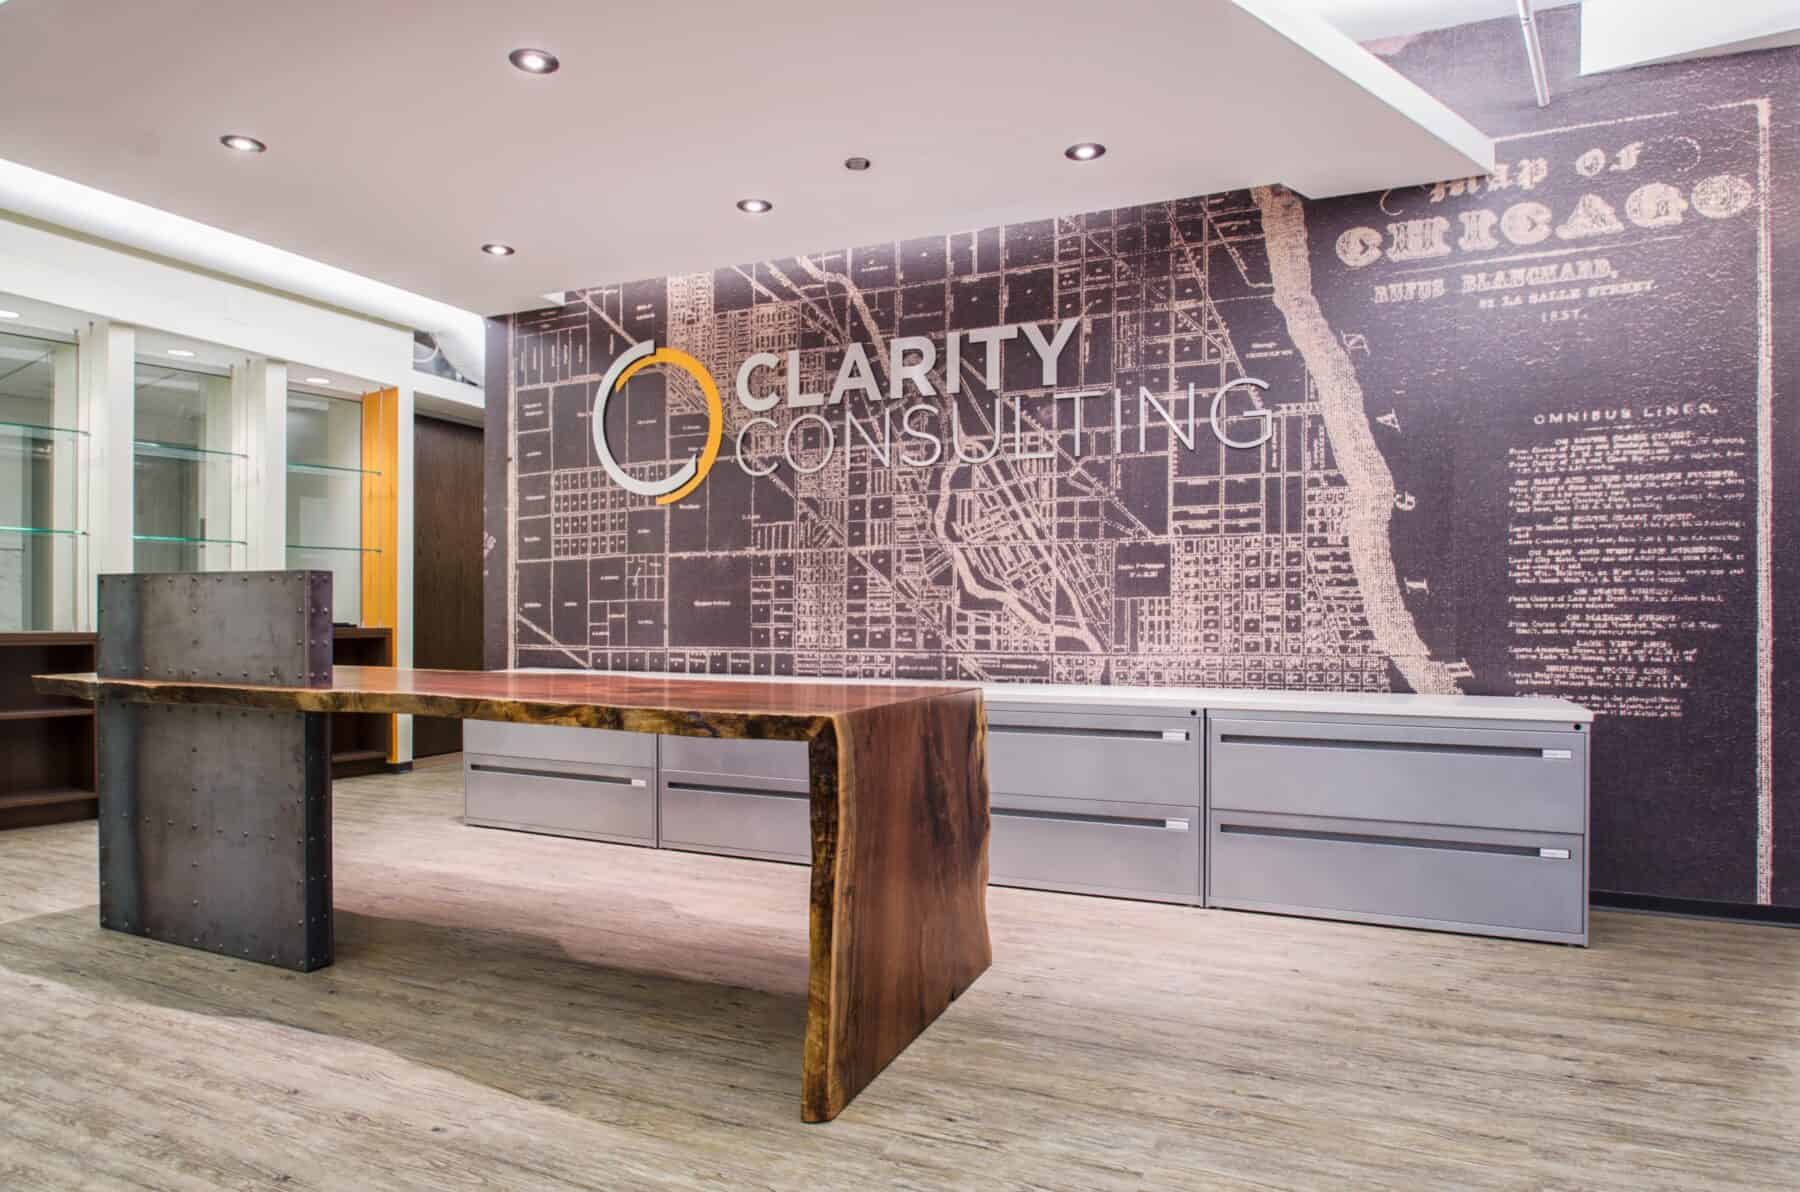 Custom Live Edge Walnut Reception Desk with Distressed Metal Base with Rivets from Construction Specialty Projects by Commercial Builder & General Contractor Structural Enterprises